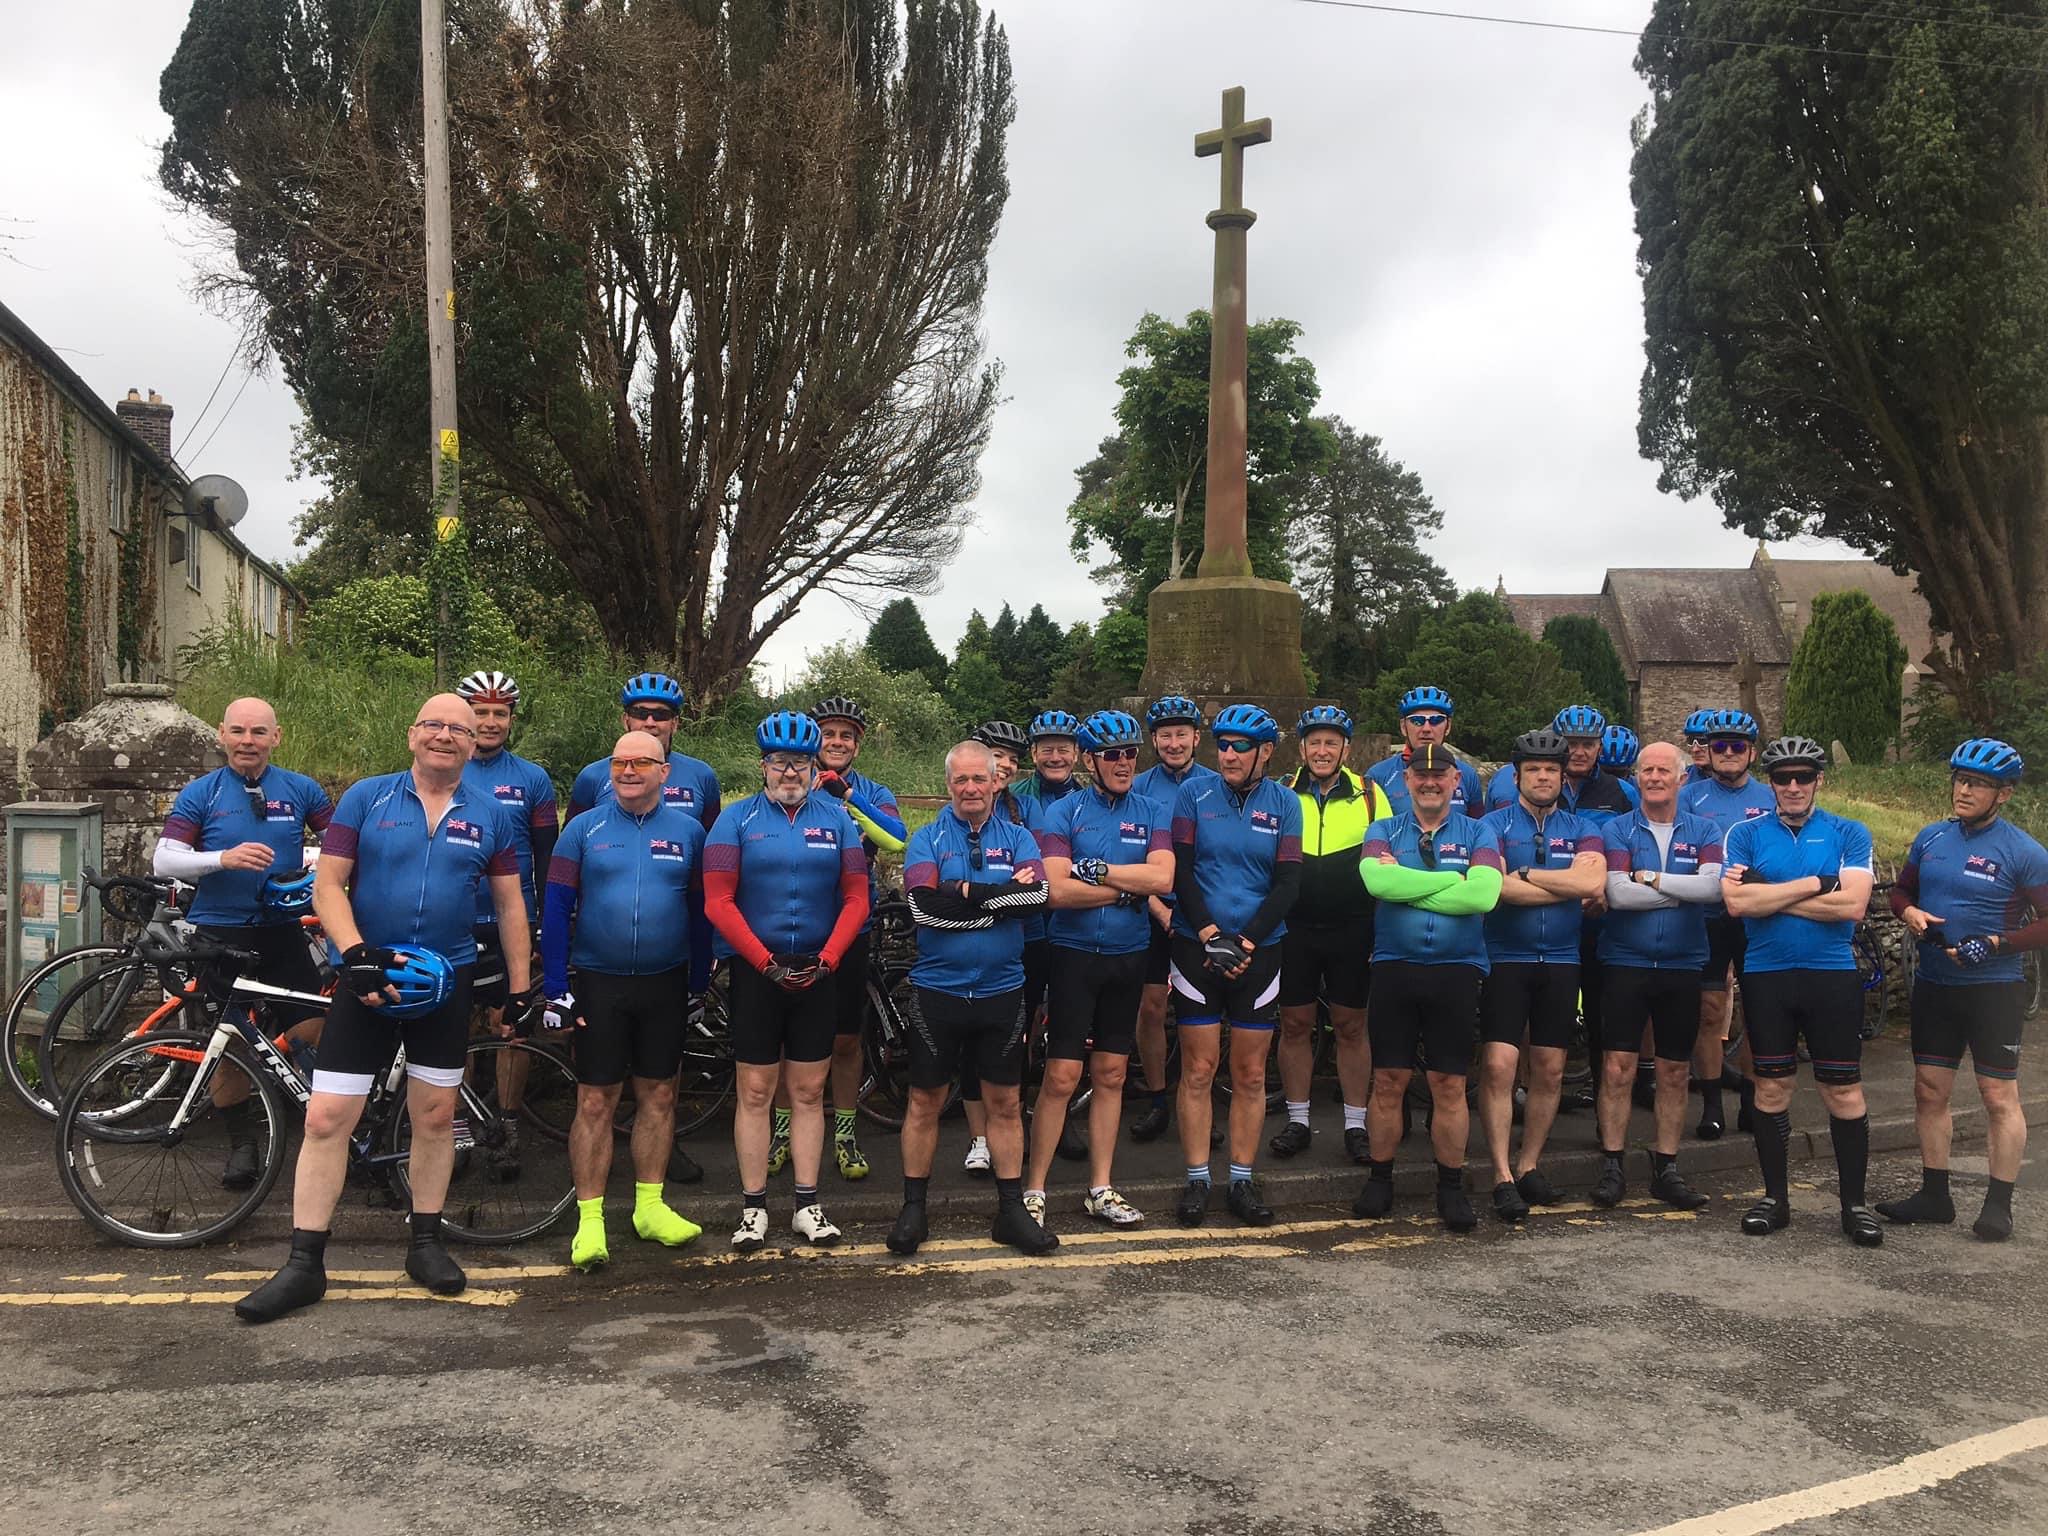 NEWS | Falklands 40 team set off from Herefordshire on trip across the UK in memory of the 255 British fatalities during Falklands War